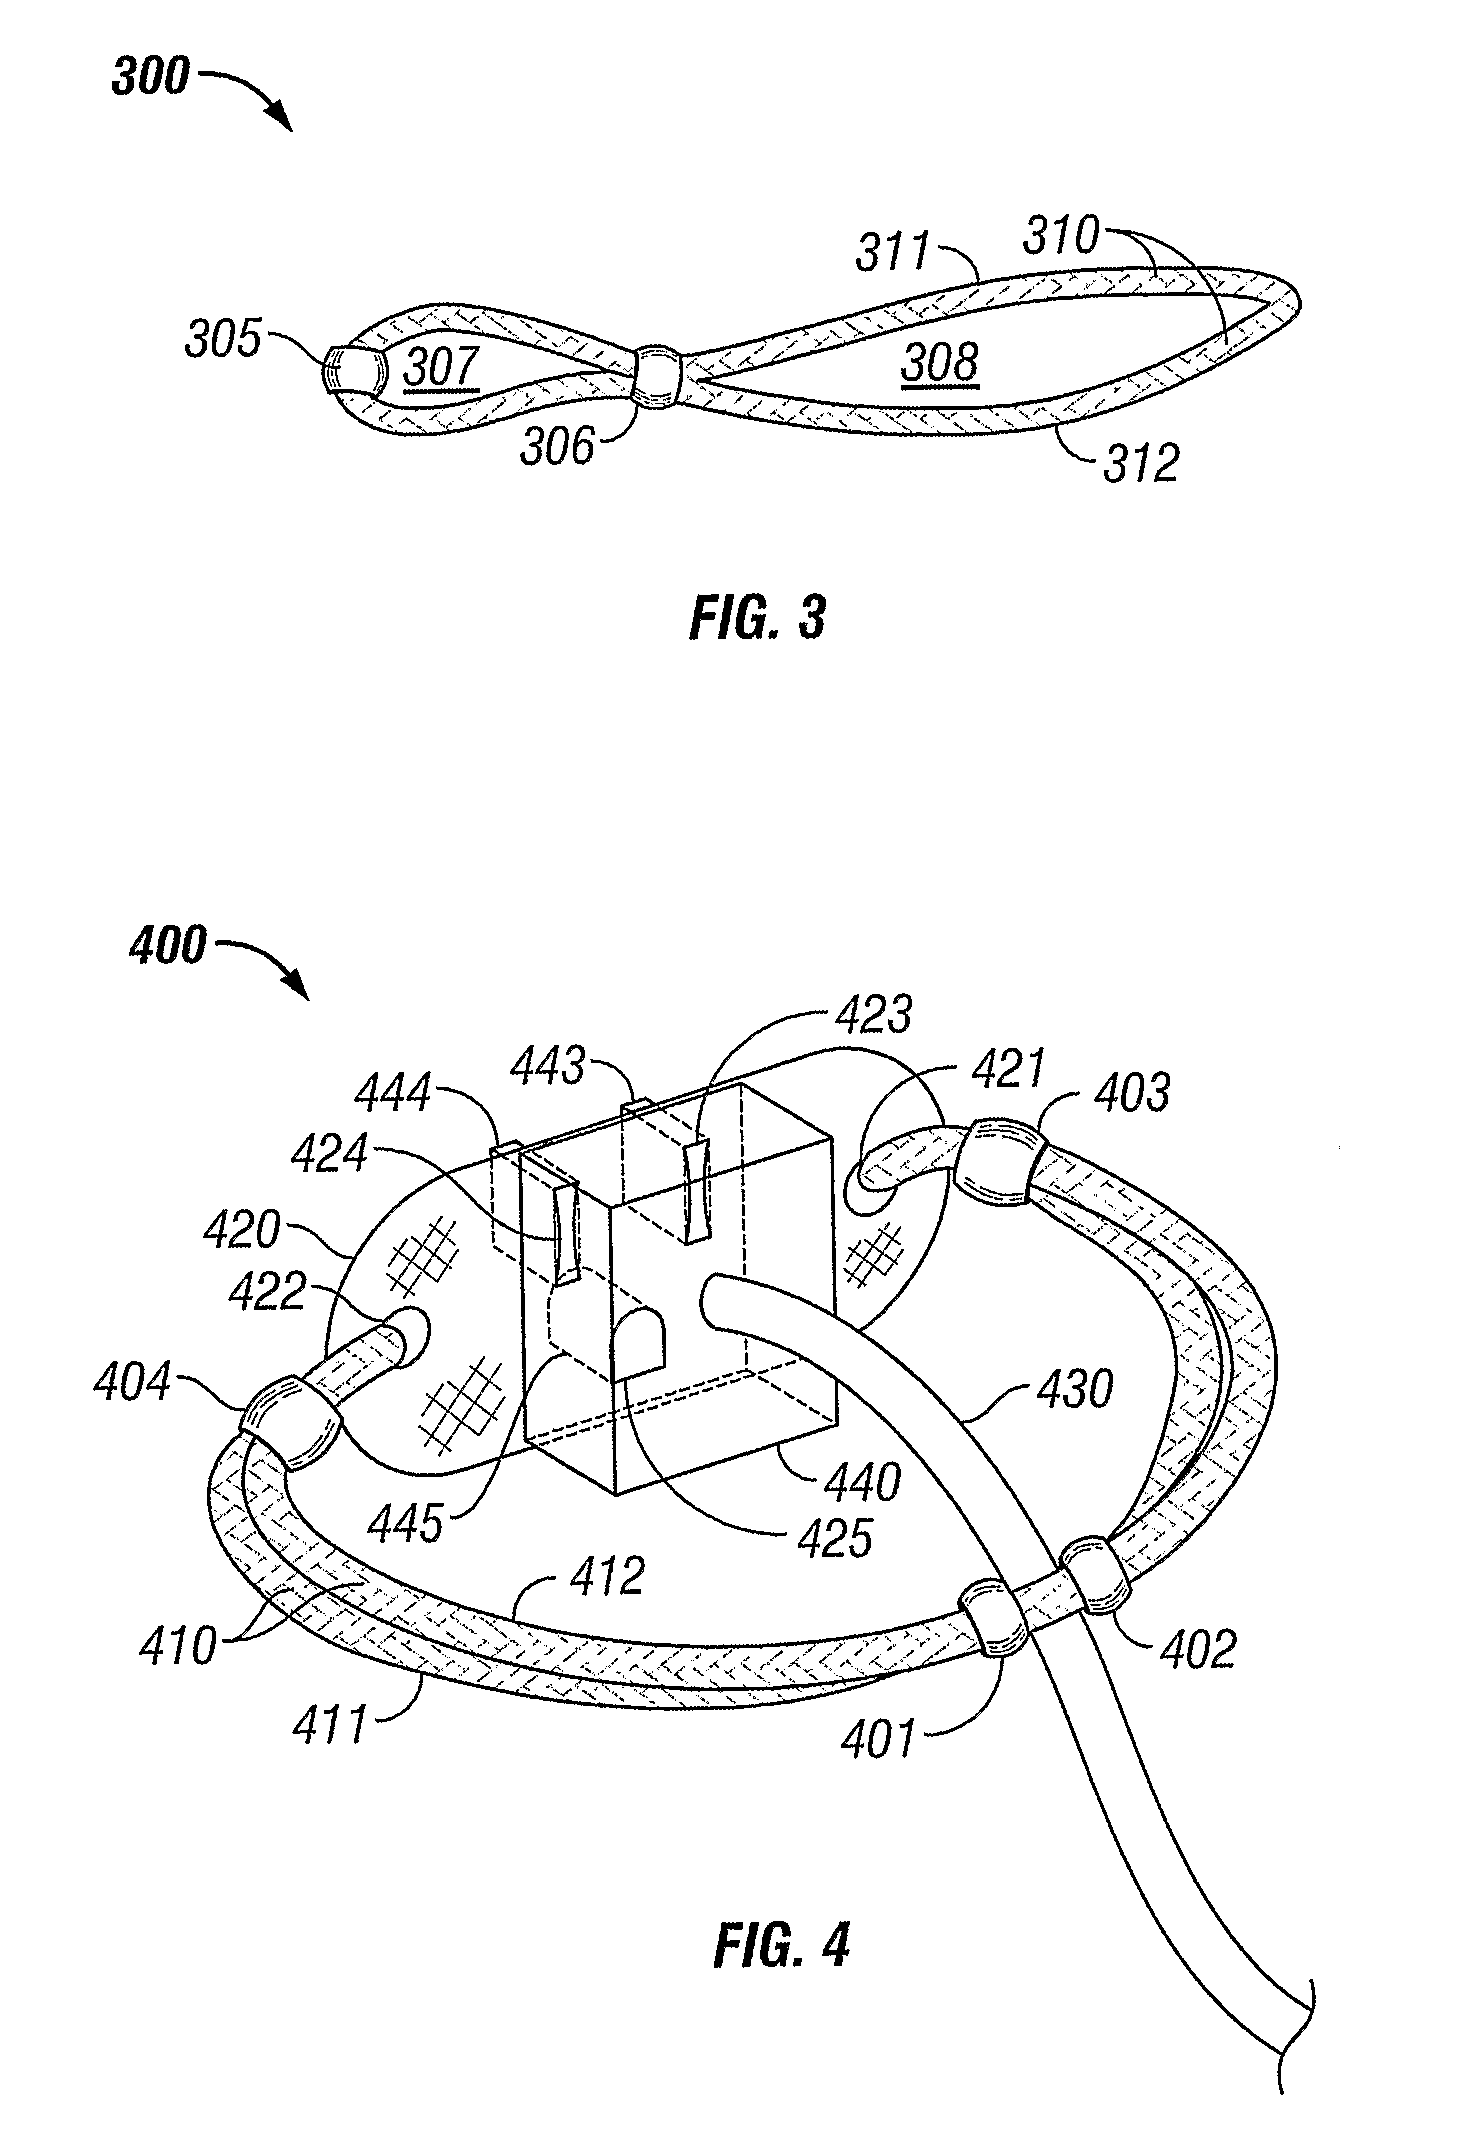 Apparatus to assist in removing an electrical plug from a socket